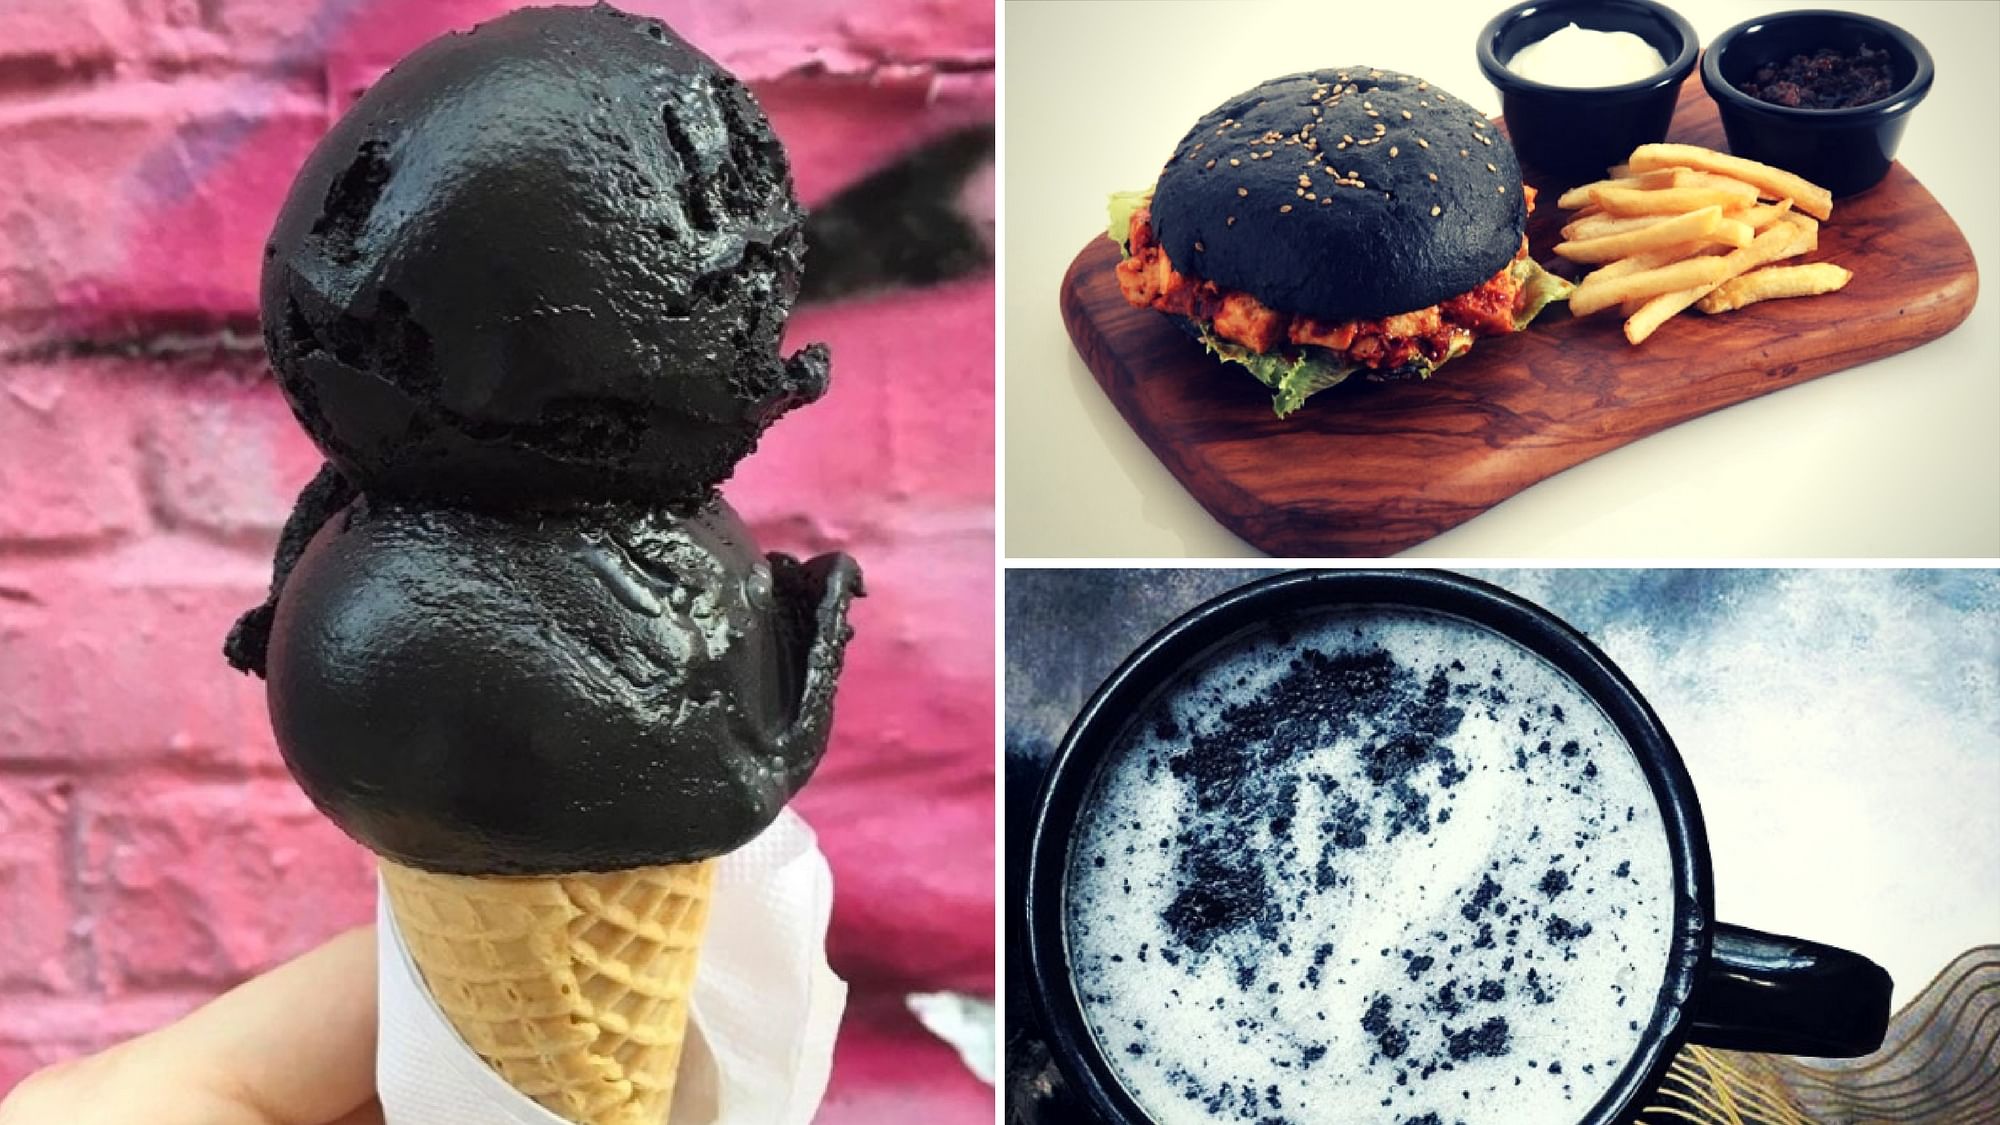 While the wave of blackness may have hit Instagram this year, black dishes have been around in India since 2015!